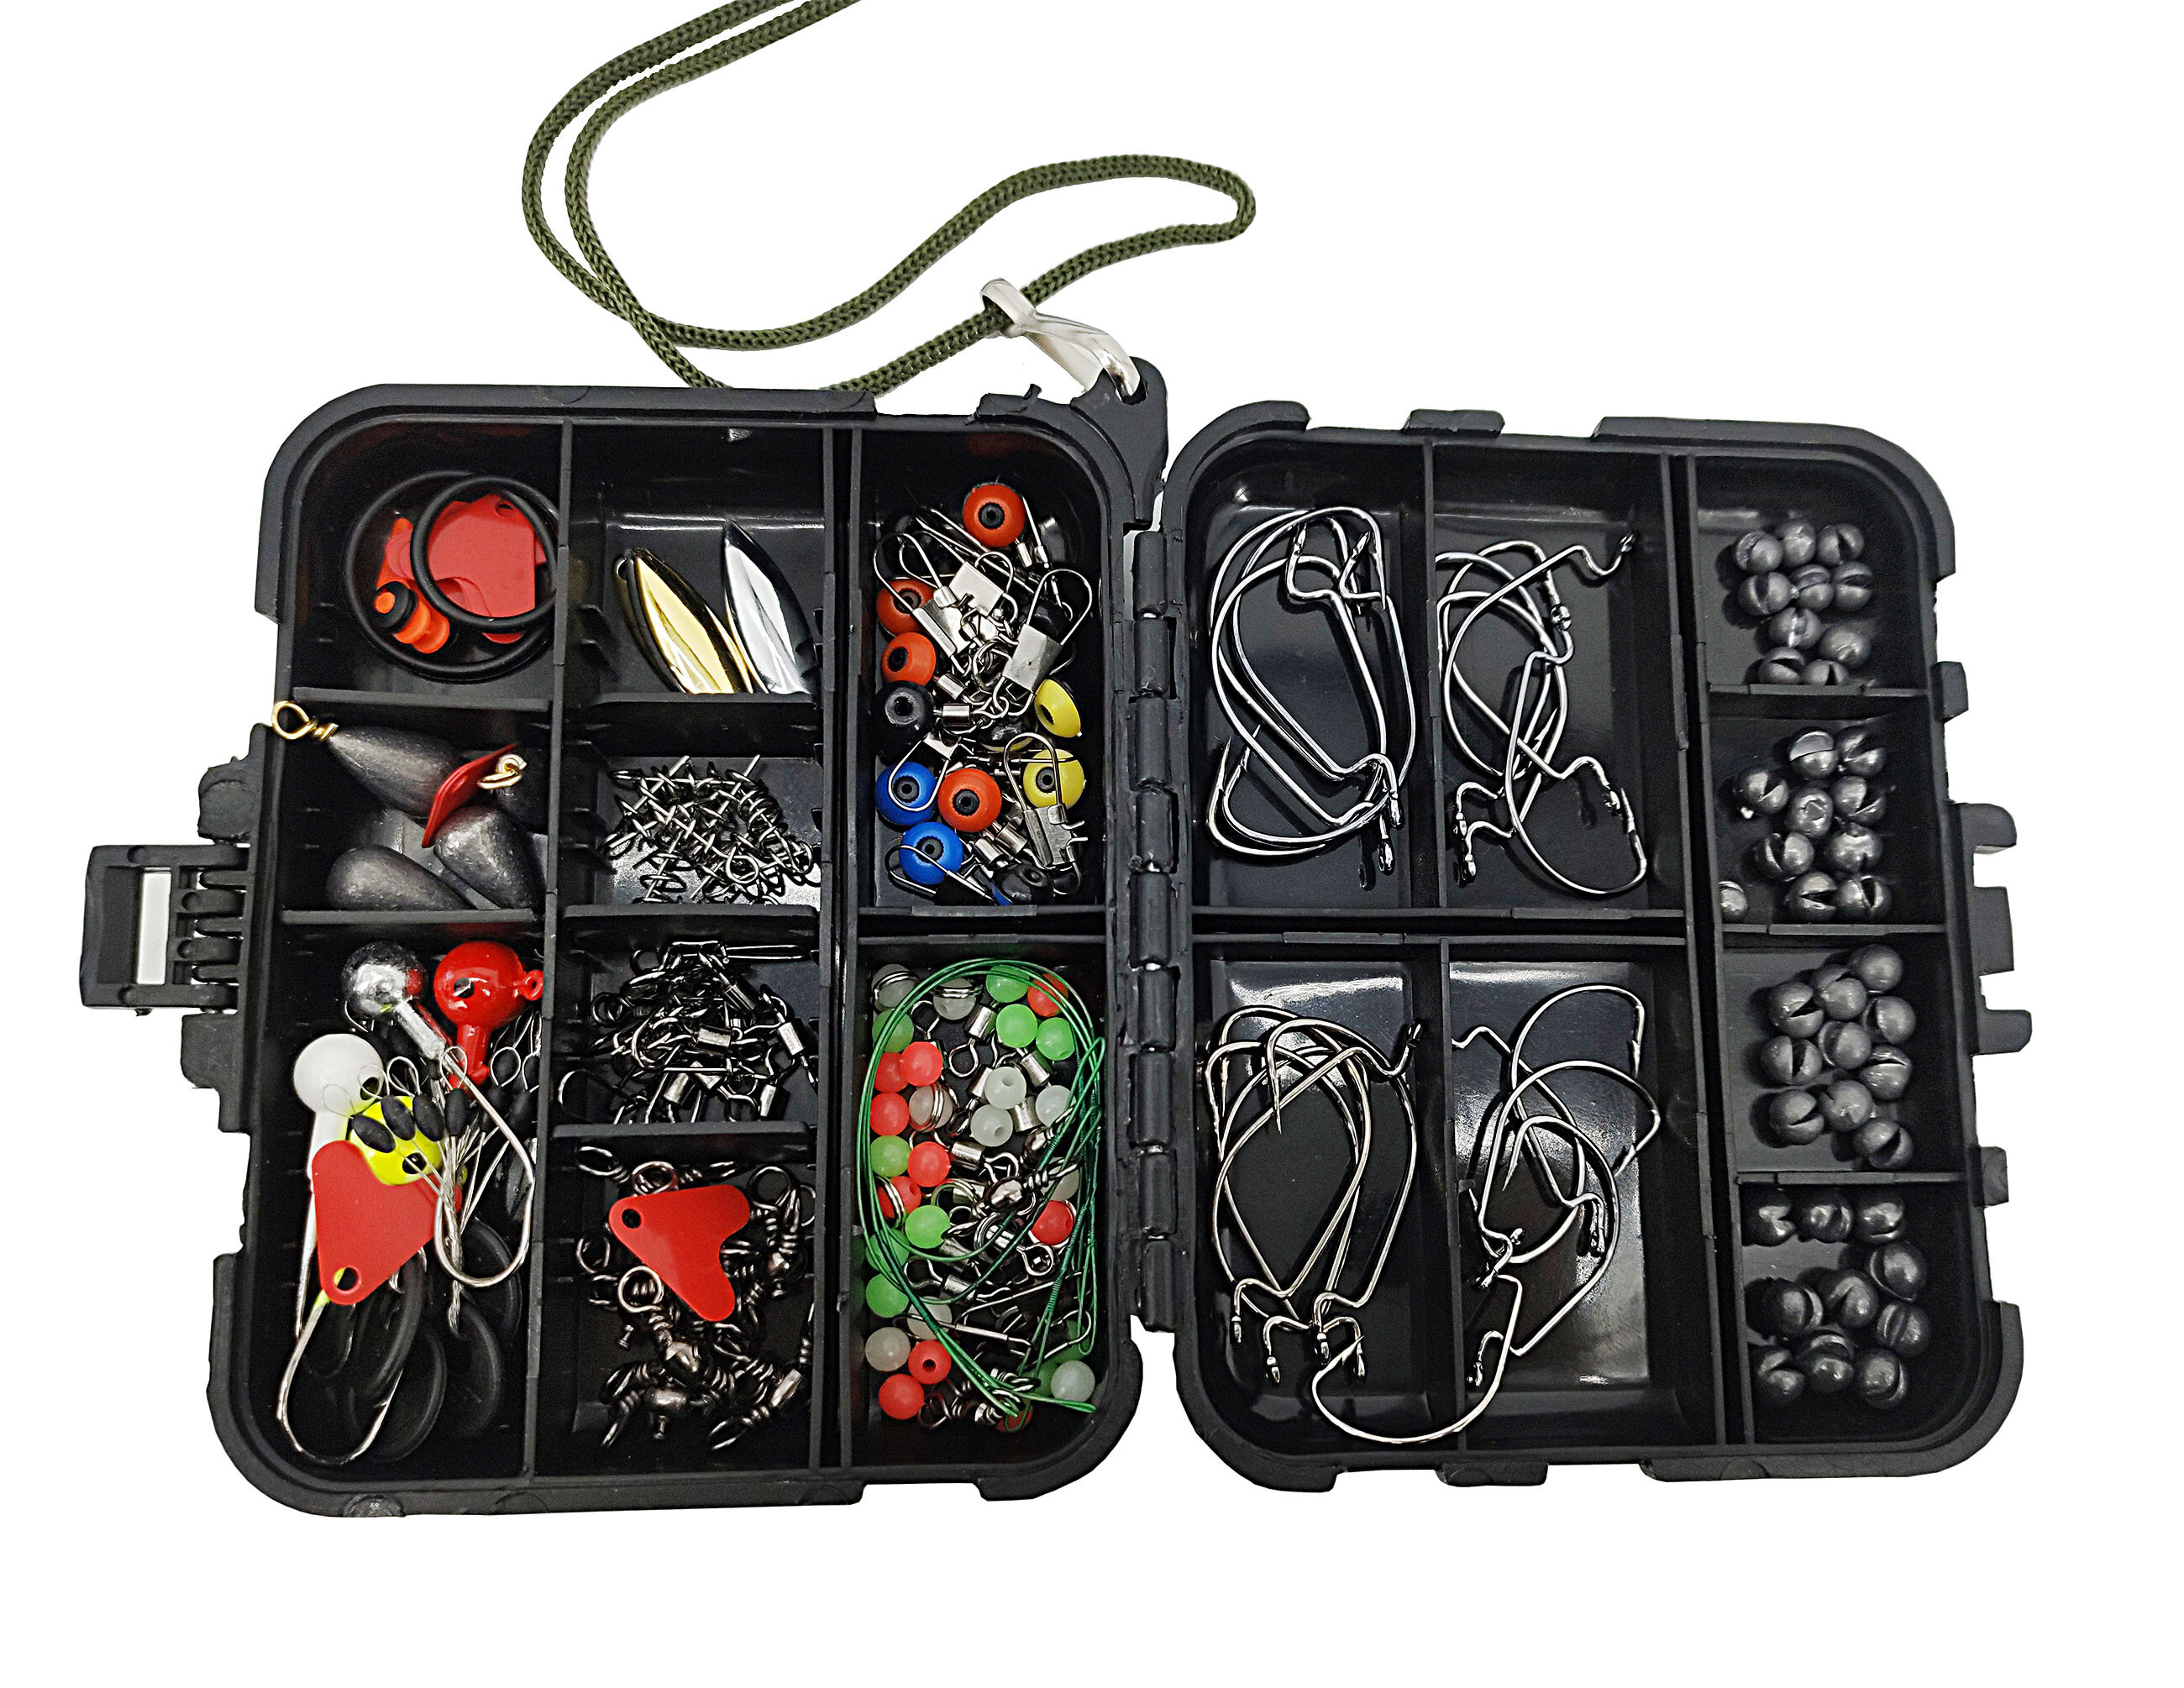 188 Fishing Accessories Kit, Including Jig Hooks, Bullet Bass Casting  Sinker Weights